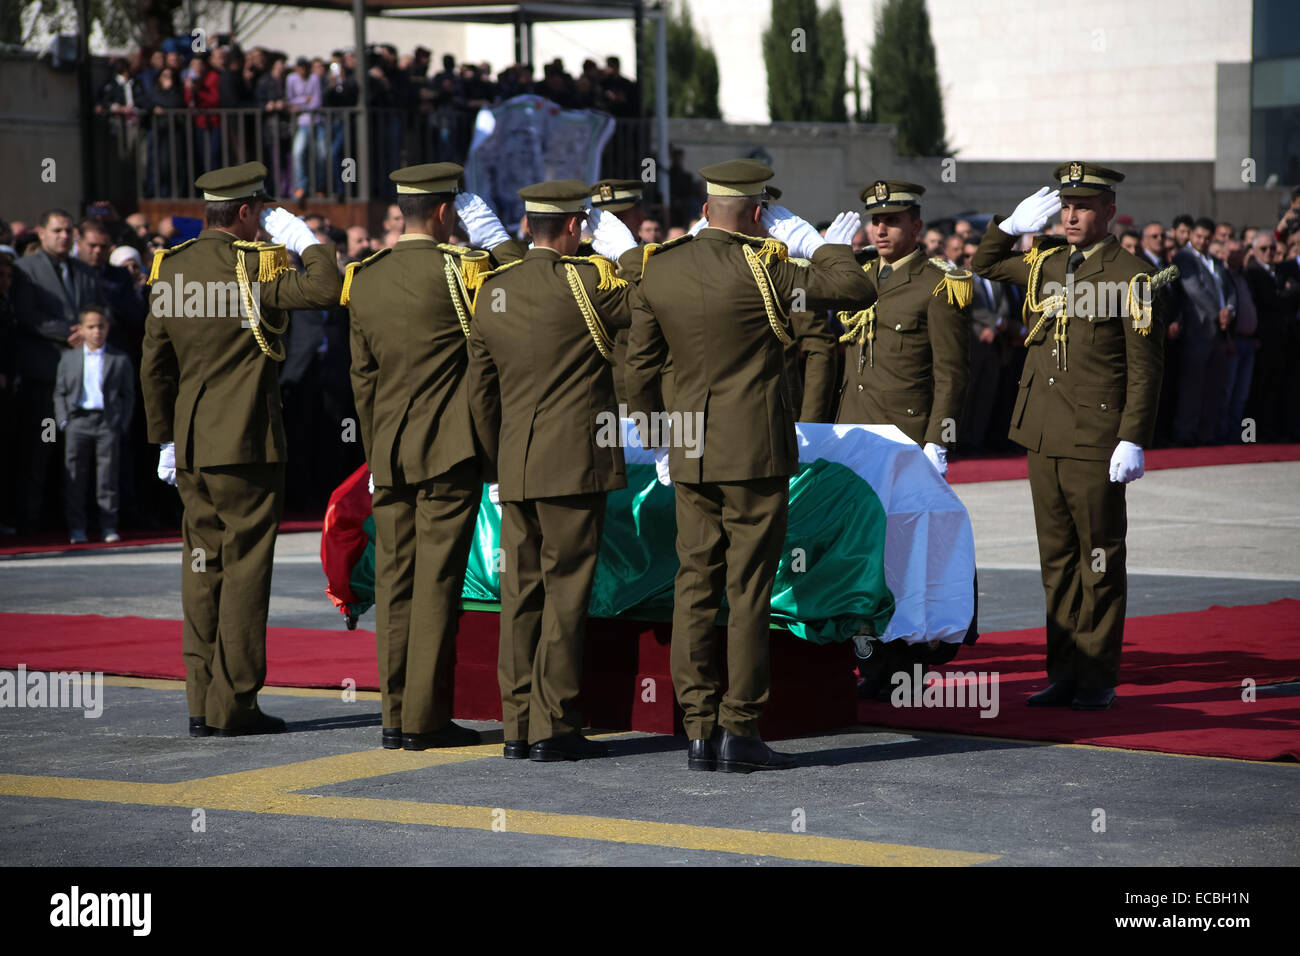 (141211) -- RAMALLAH, Dec. 11, 2014 (Xinhua) -- Palestinian honor guard salutes by the coffin during the funeral procession of the late Palestinian cabinet member Ziad Abu Ain at the Palestinian Authority headquarters in the West Bank city of Ramallah, on Dec. 11, 2014.   (Xinhua/Fadi Arouri) Stock Photo